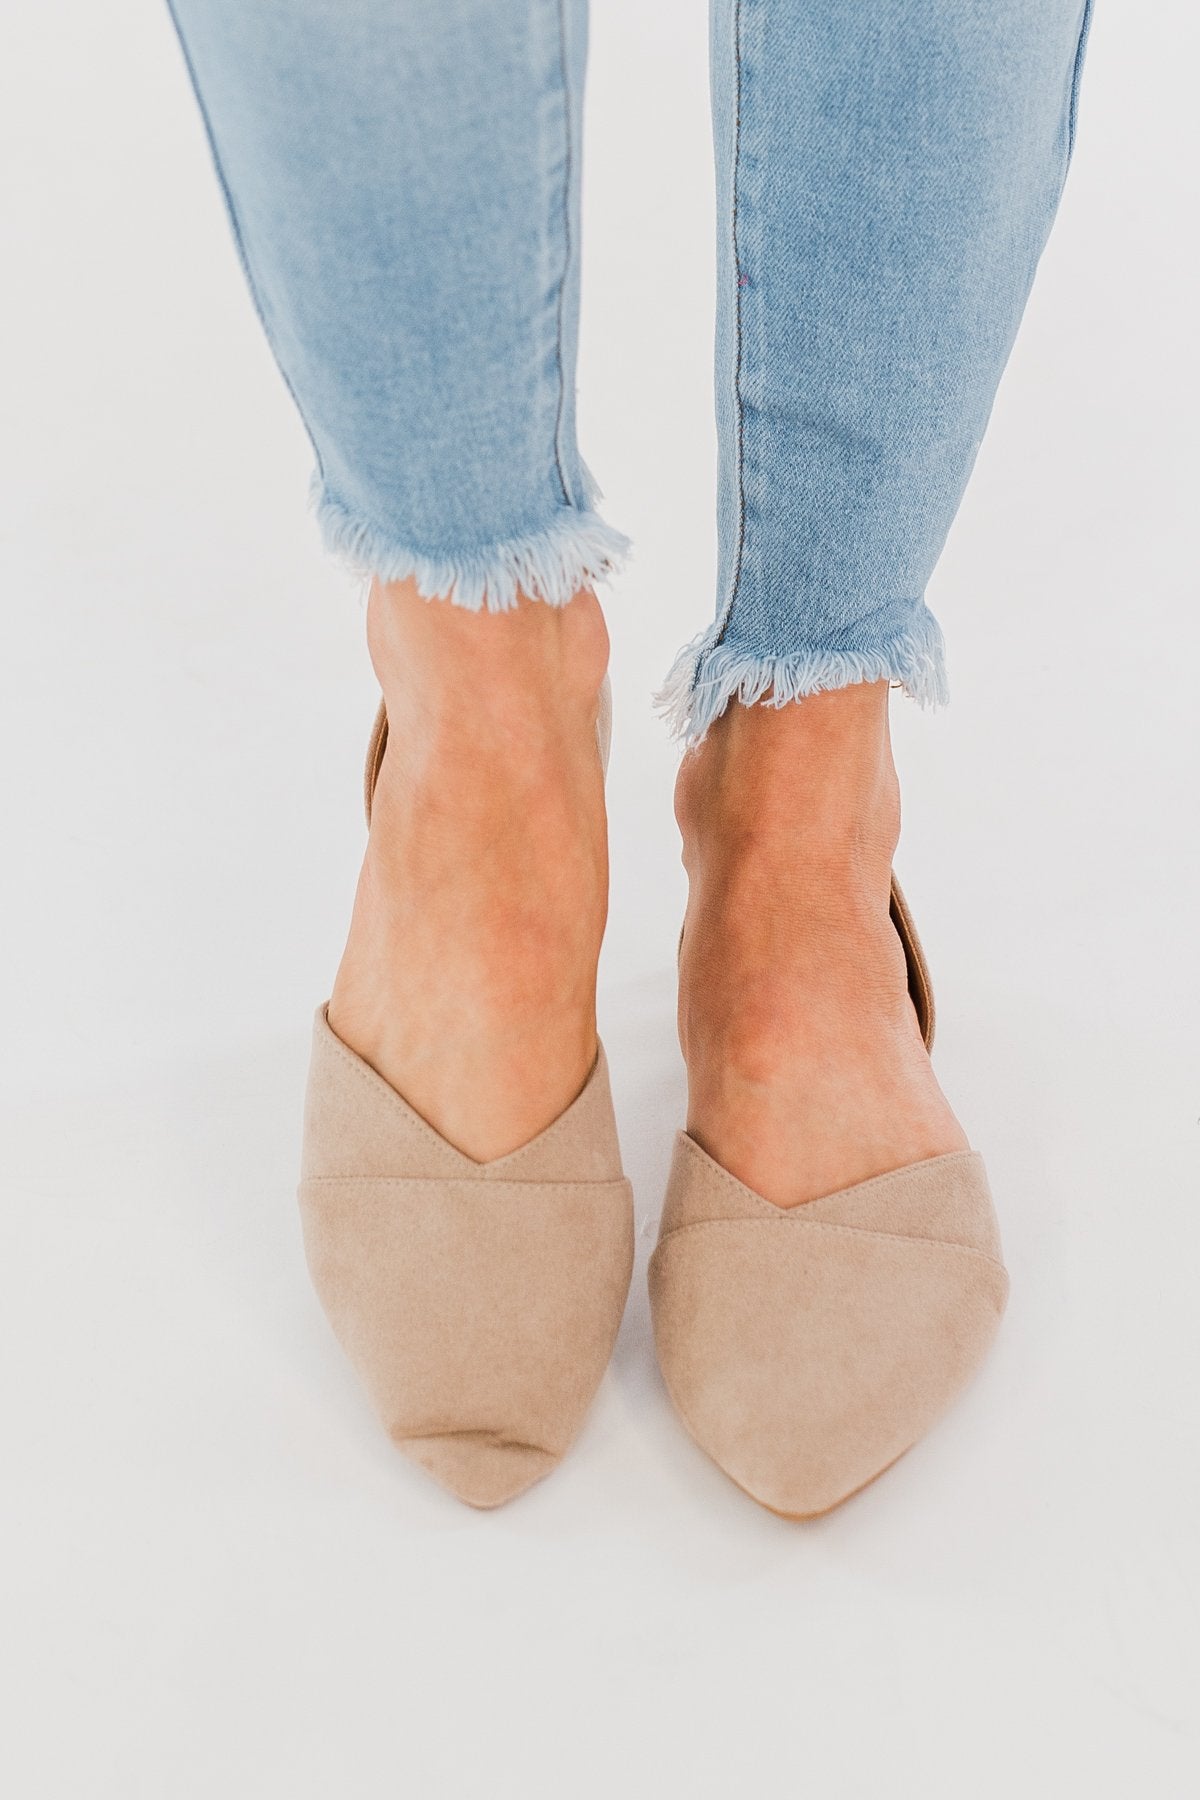 Qupid Zoom Flats- Taupe Suede